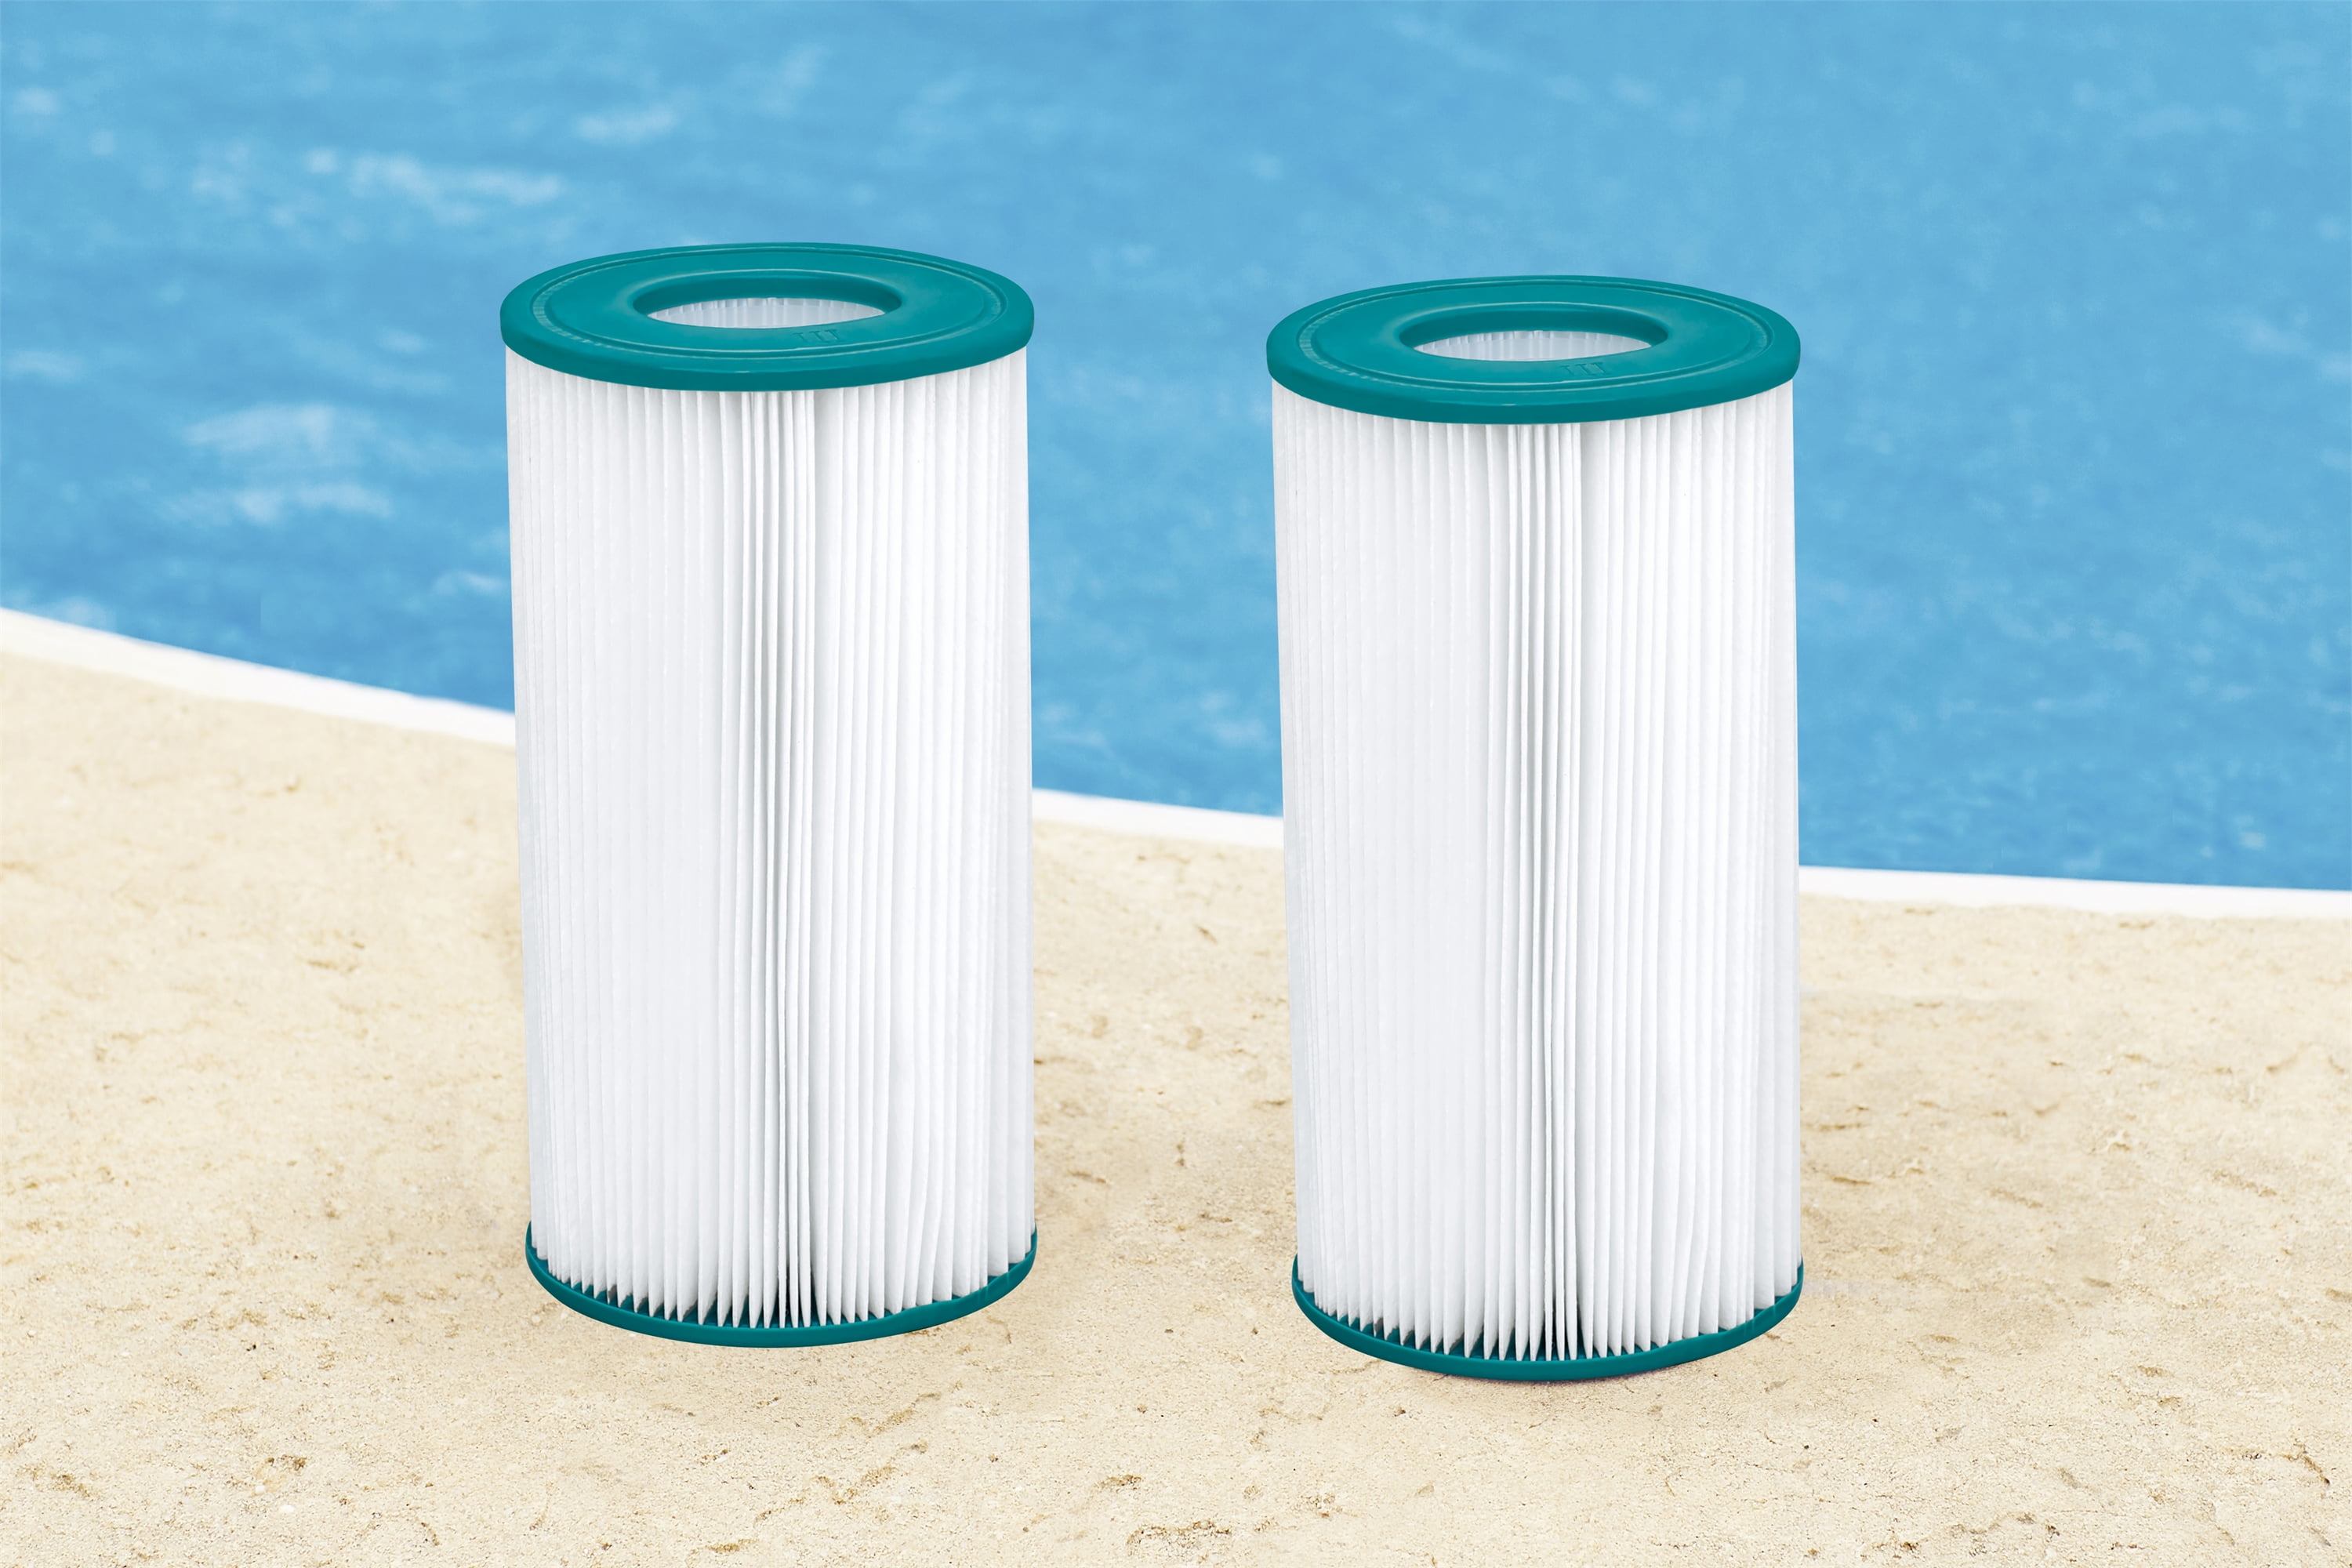 Mainstays Type III, A/C Pool Filter Cartridge for Above-Ground Pools, 2 Pack